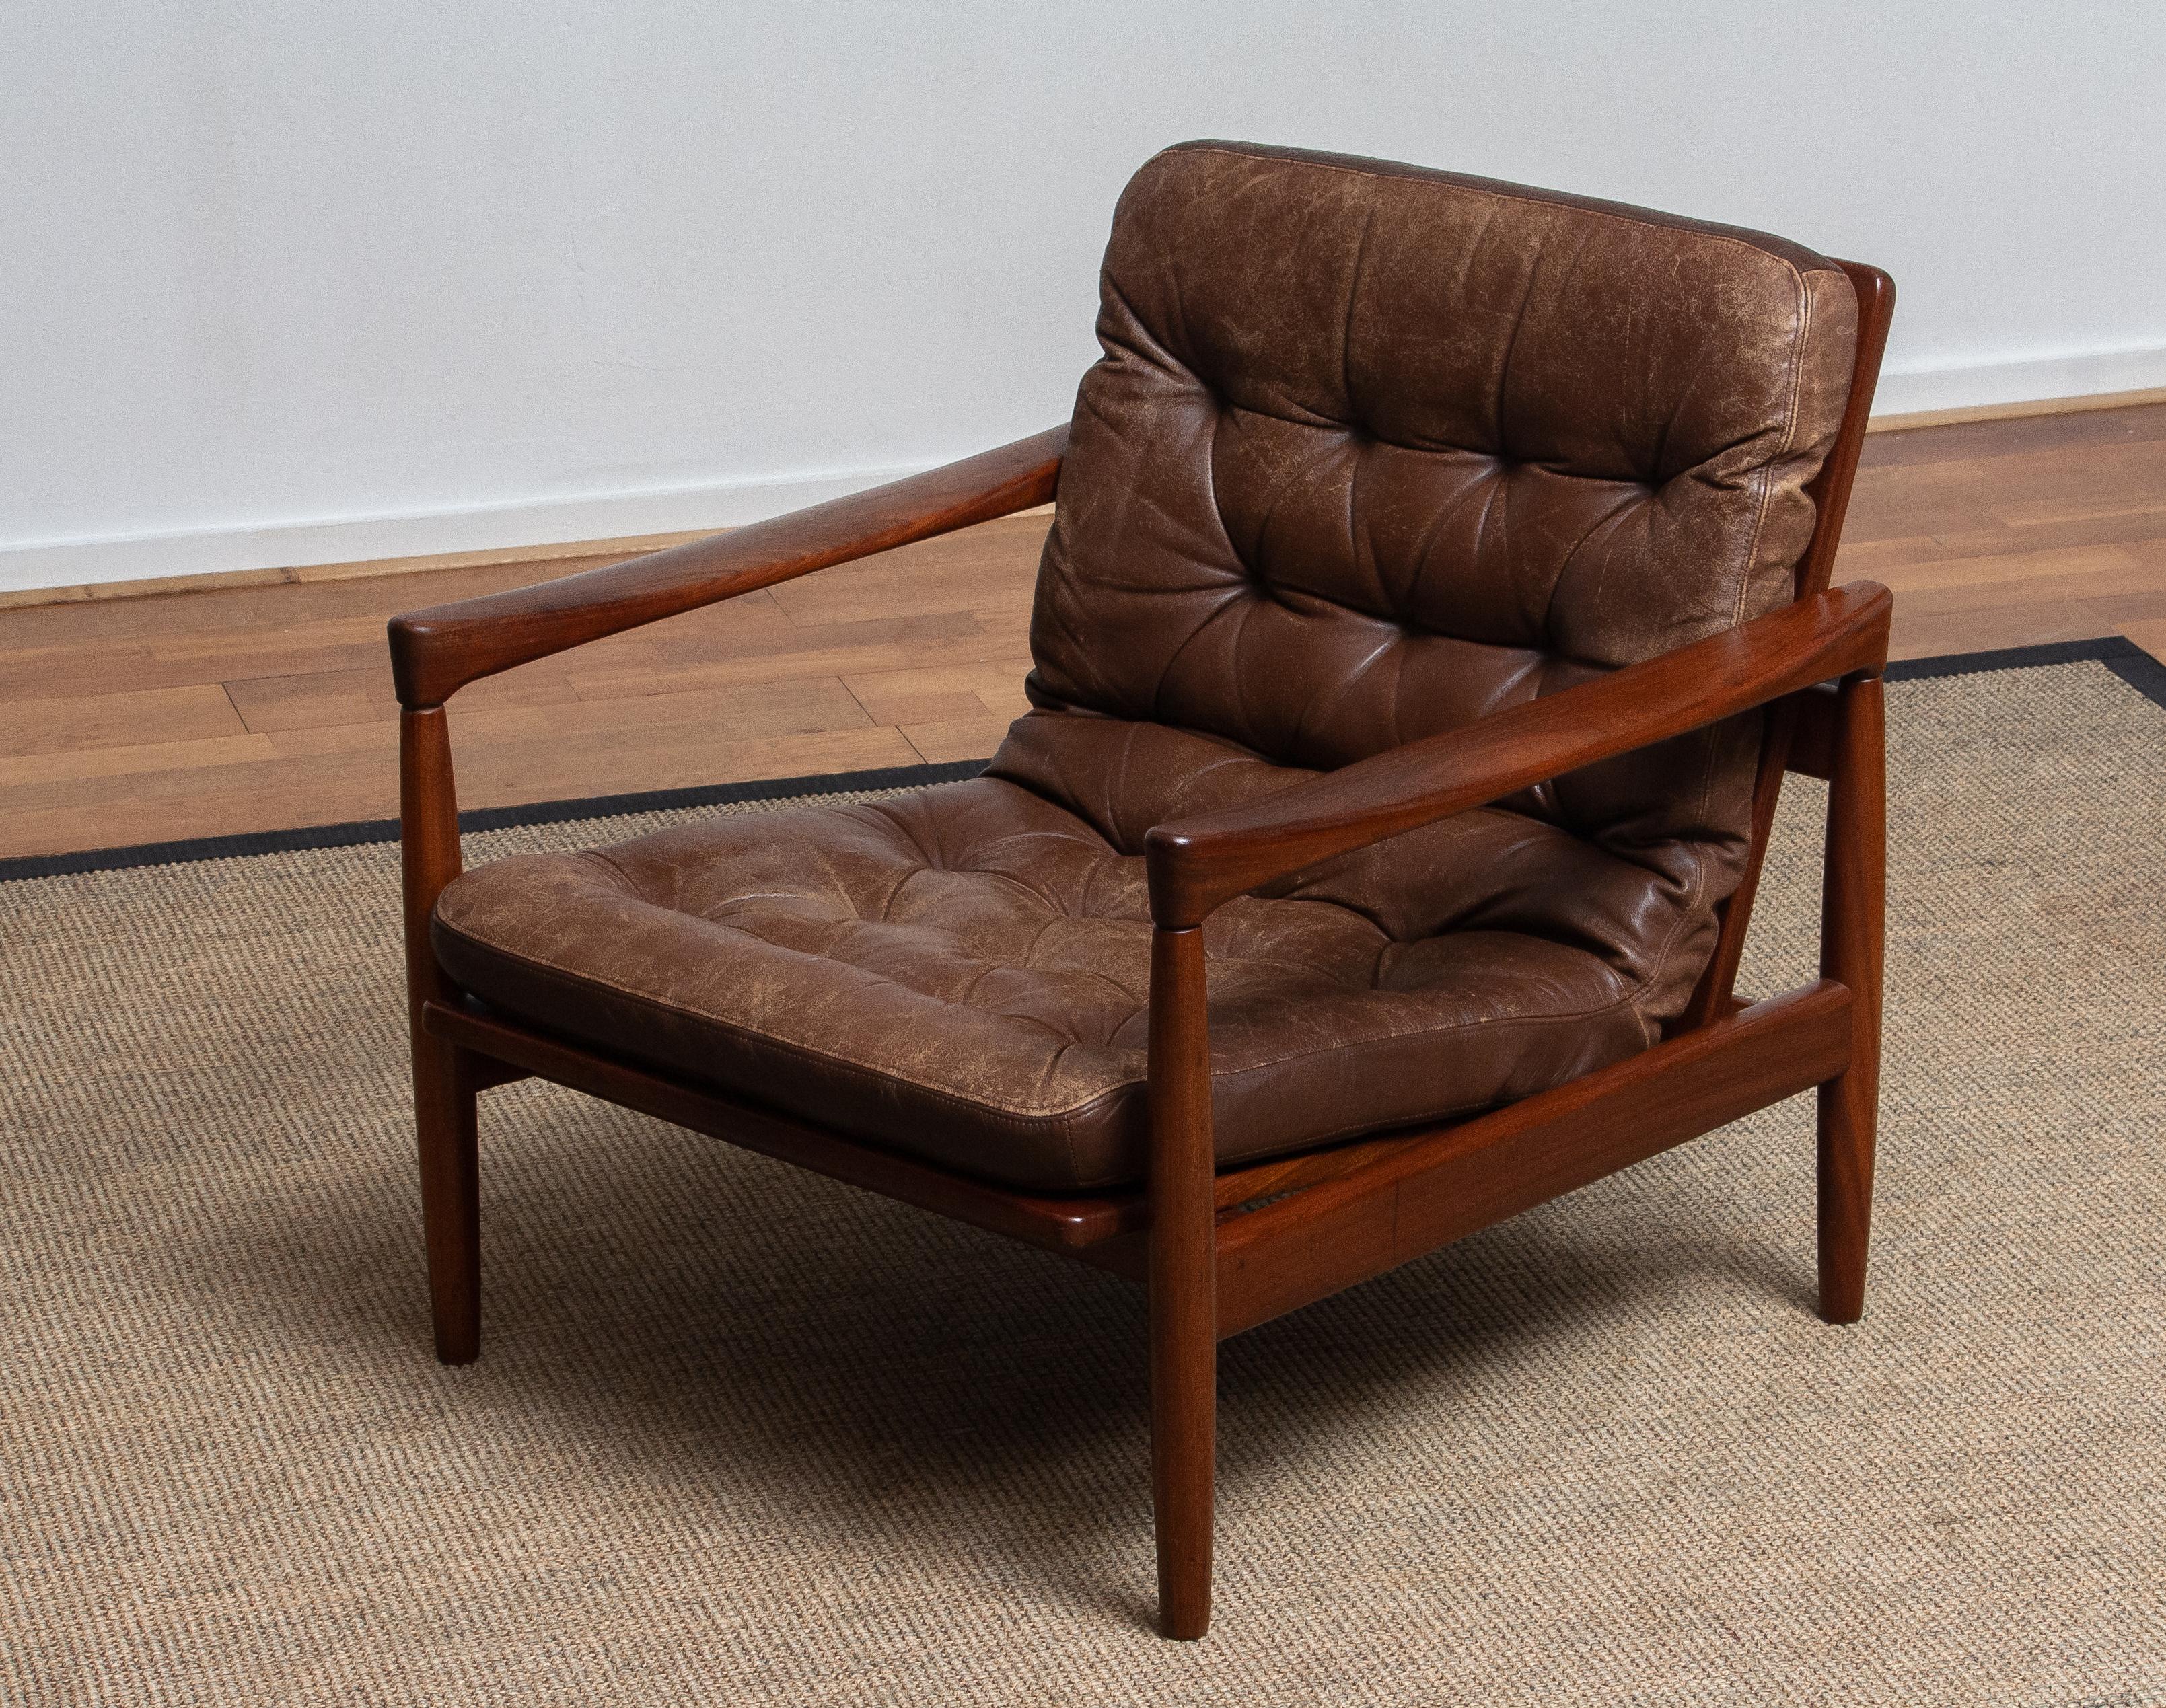 Mid-20th Century 1960s, Teak and Brown Leather Lounge Chair by Erik Wörtz for Bröderna Anderssons